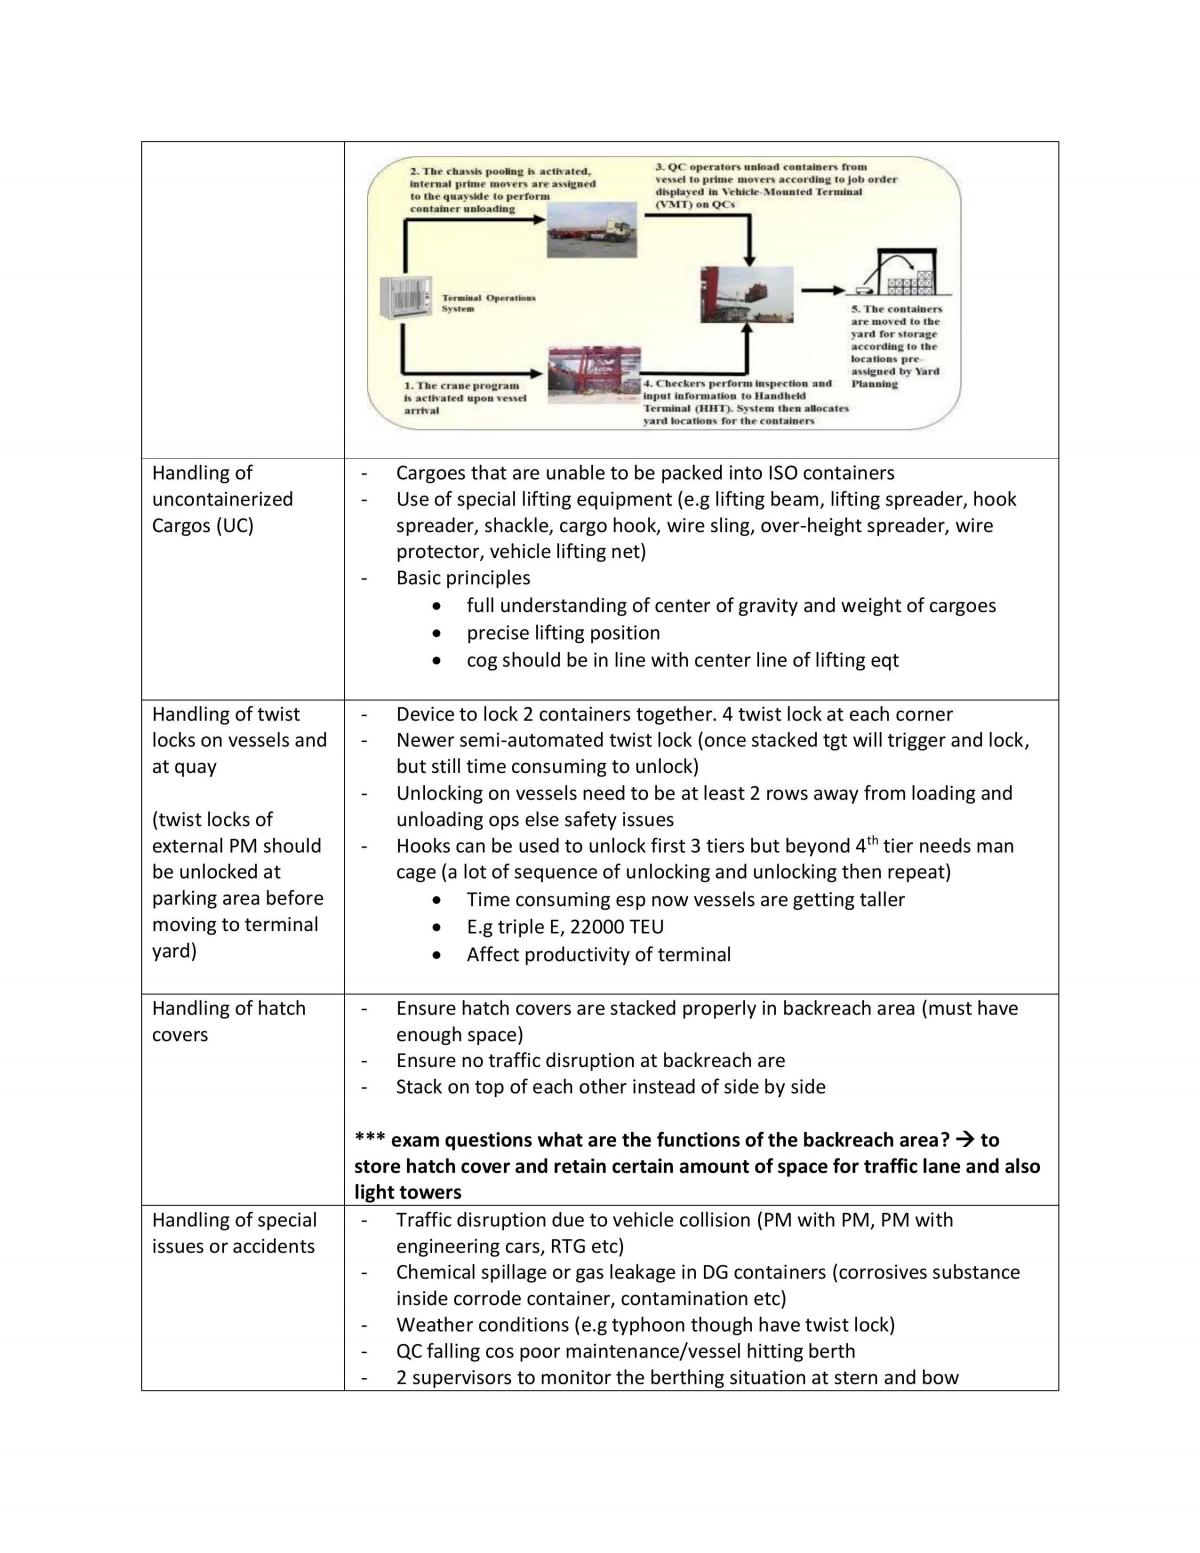 MT4103 - Port Planning and Operations Notes - Page 44